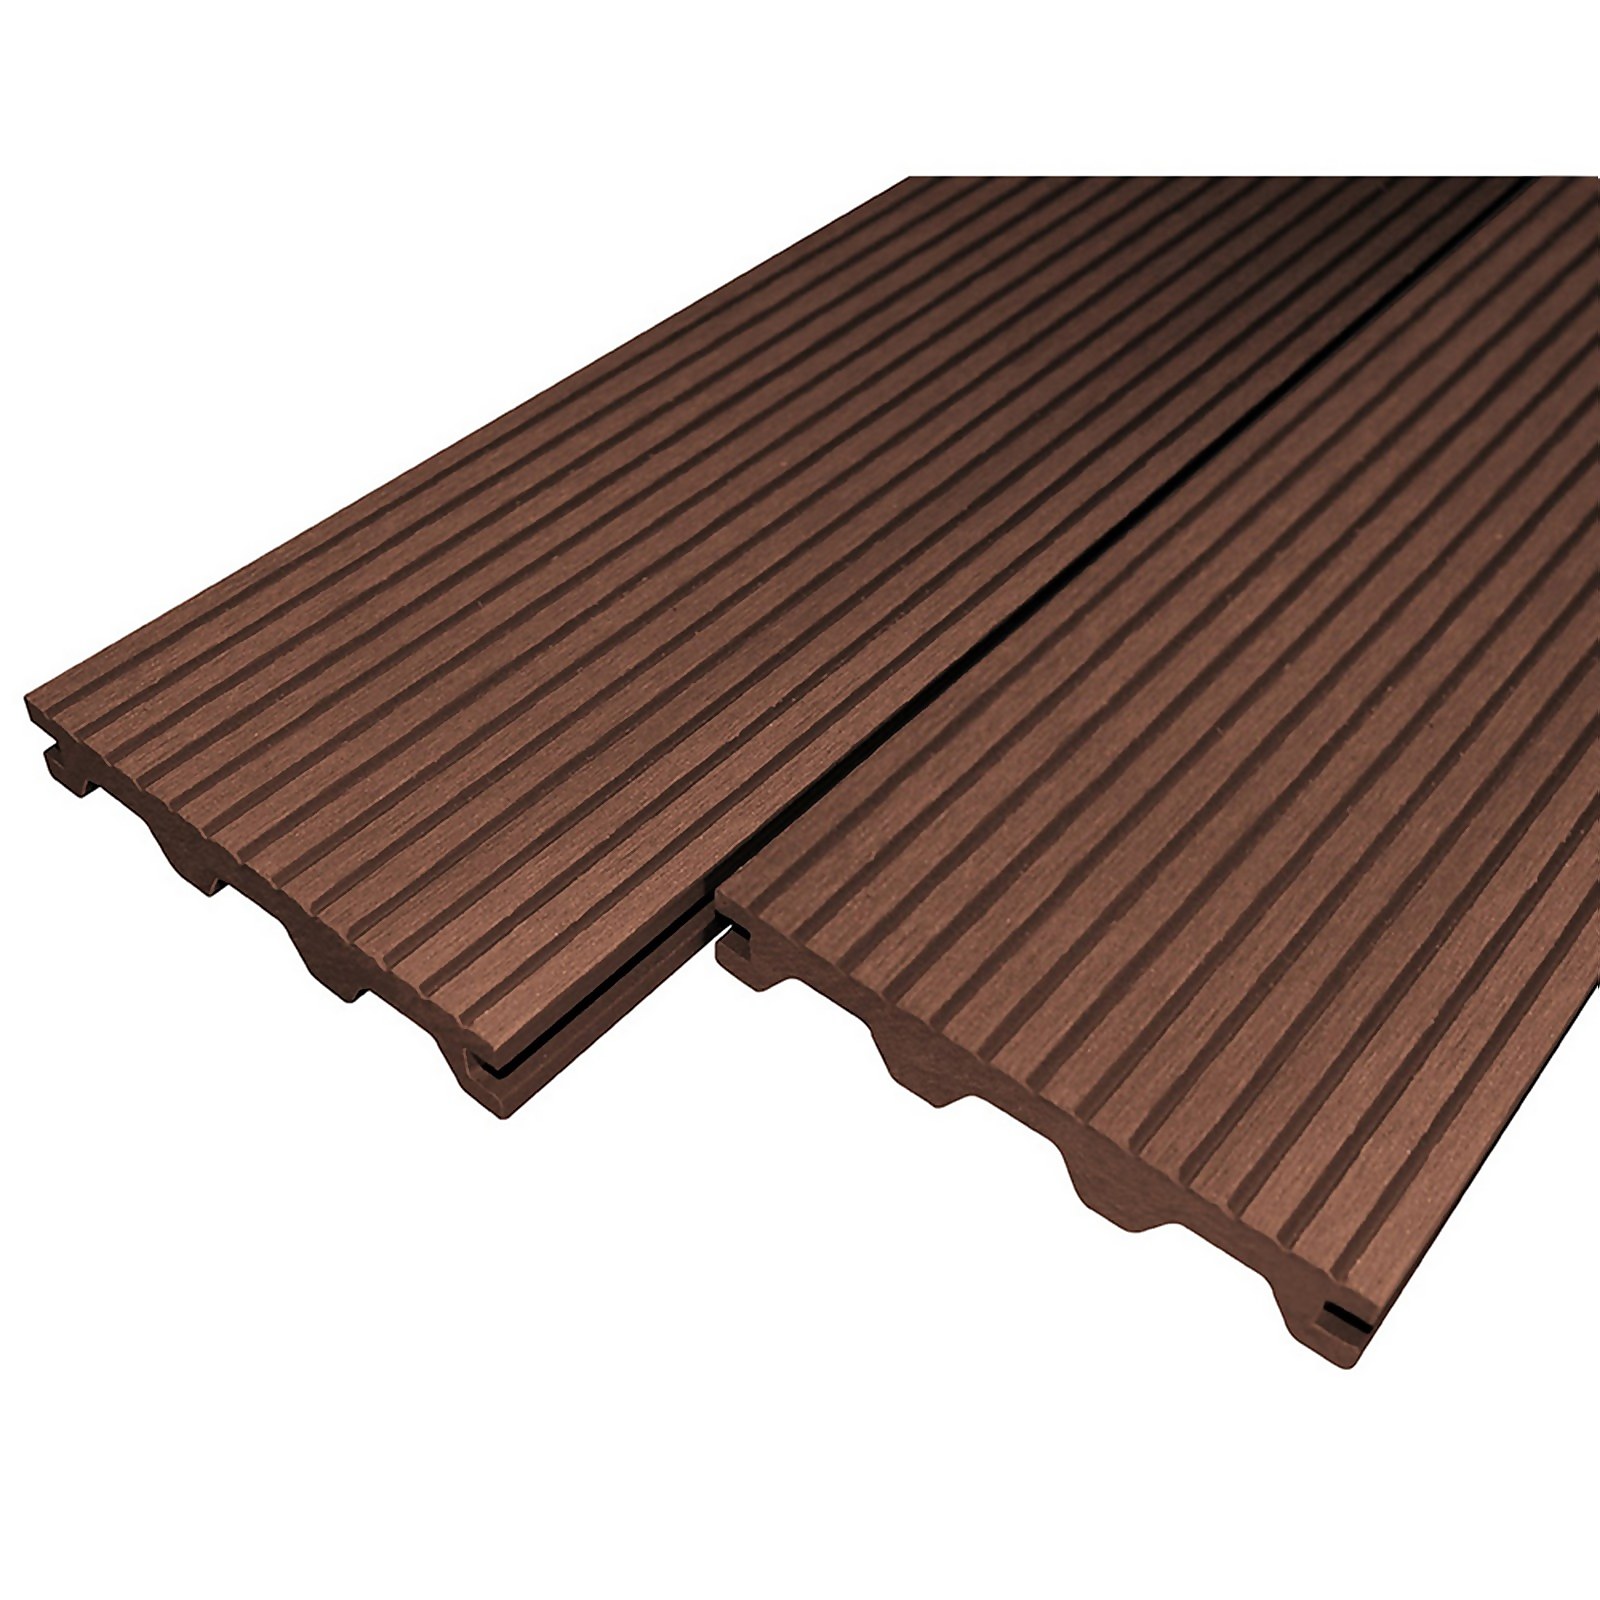 Photo of Victoria Composite Decking Castle Groove 20 Pack Redwood - 10.08 M2